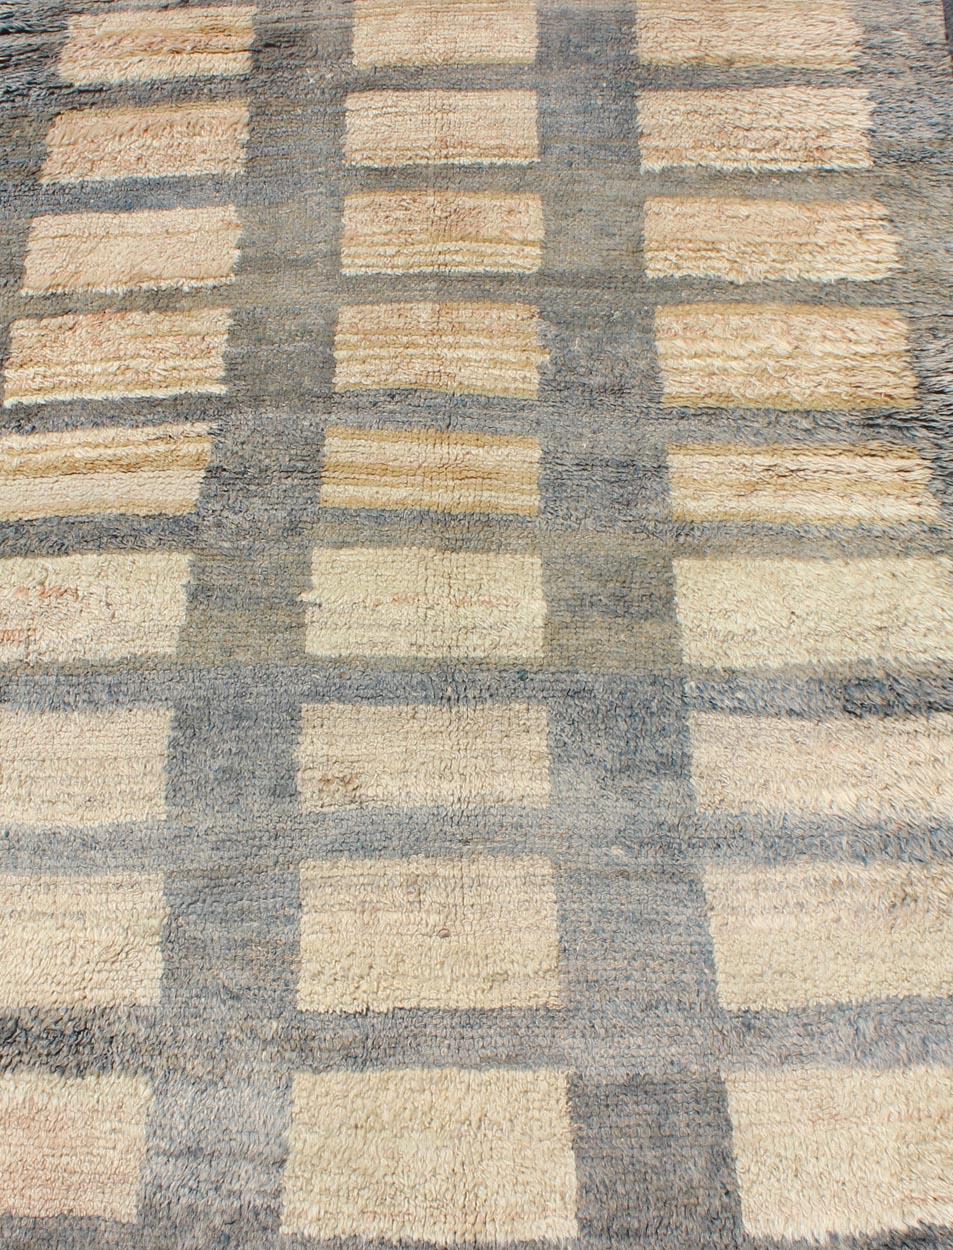 Vintage Turkish Tulu Carpet with Sand Rectangles with Gray Outlines  For Sale 4